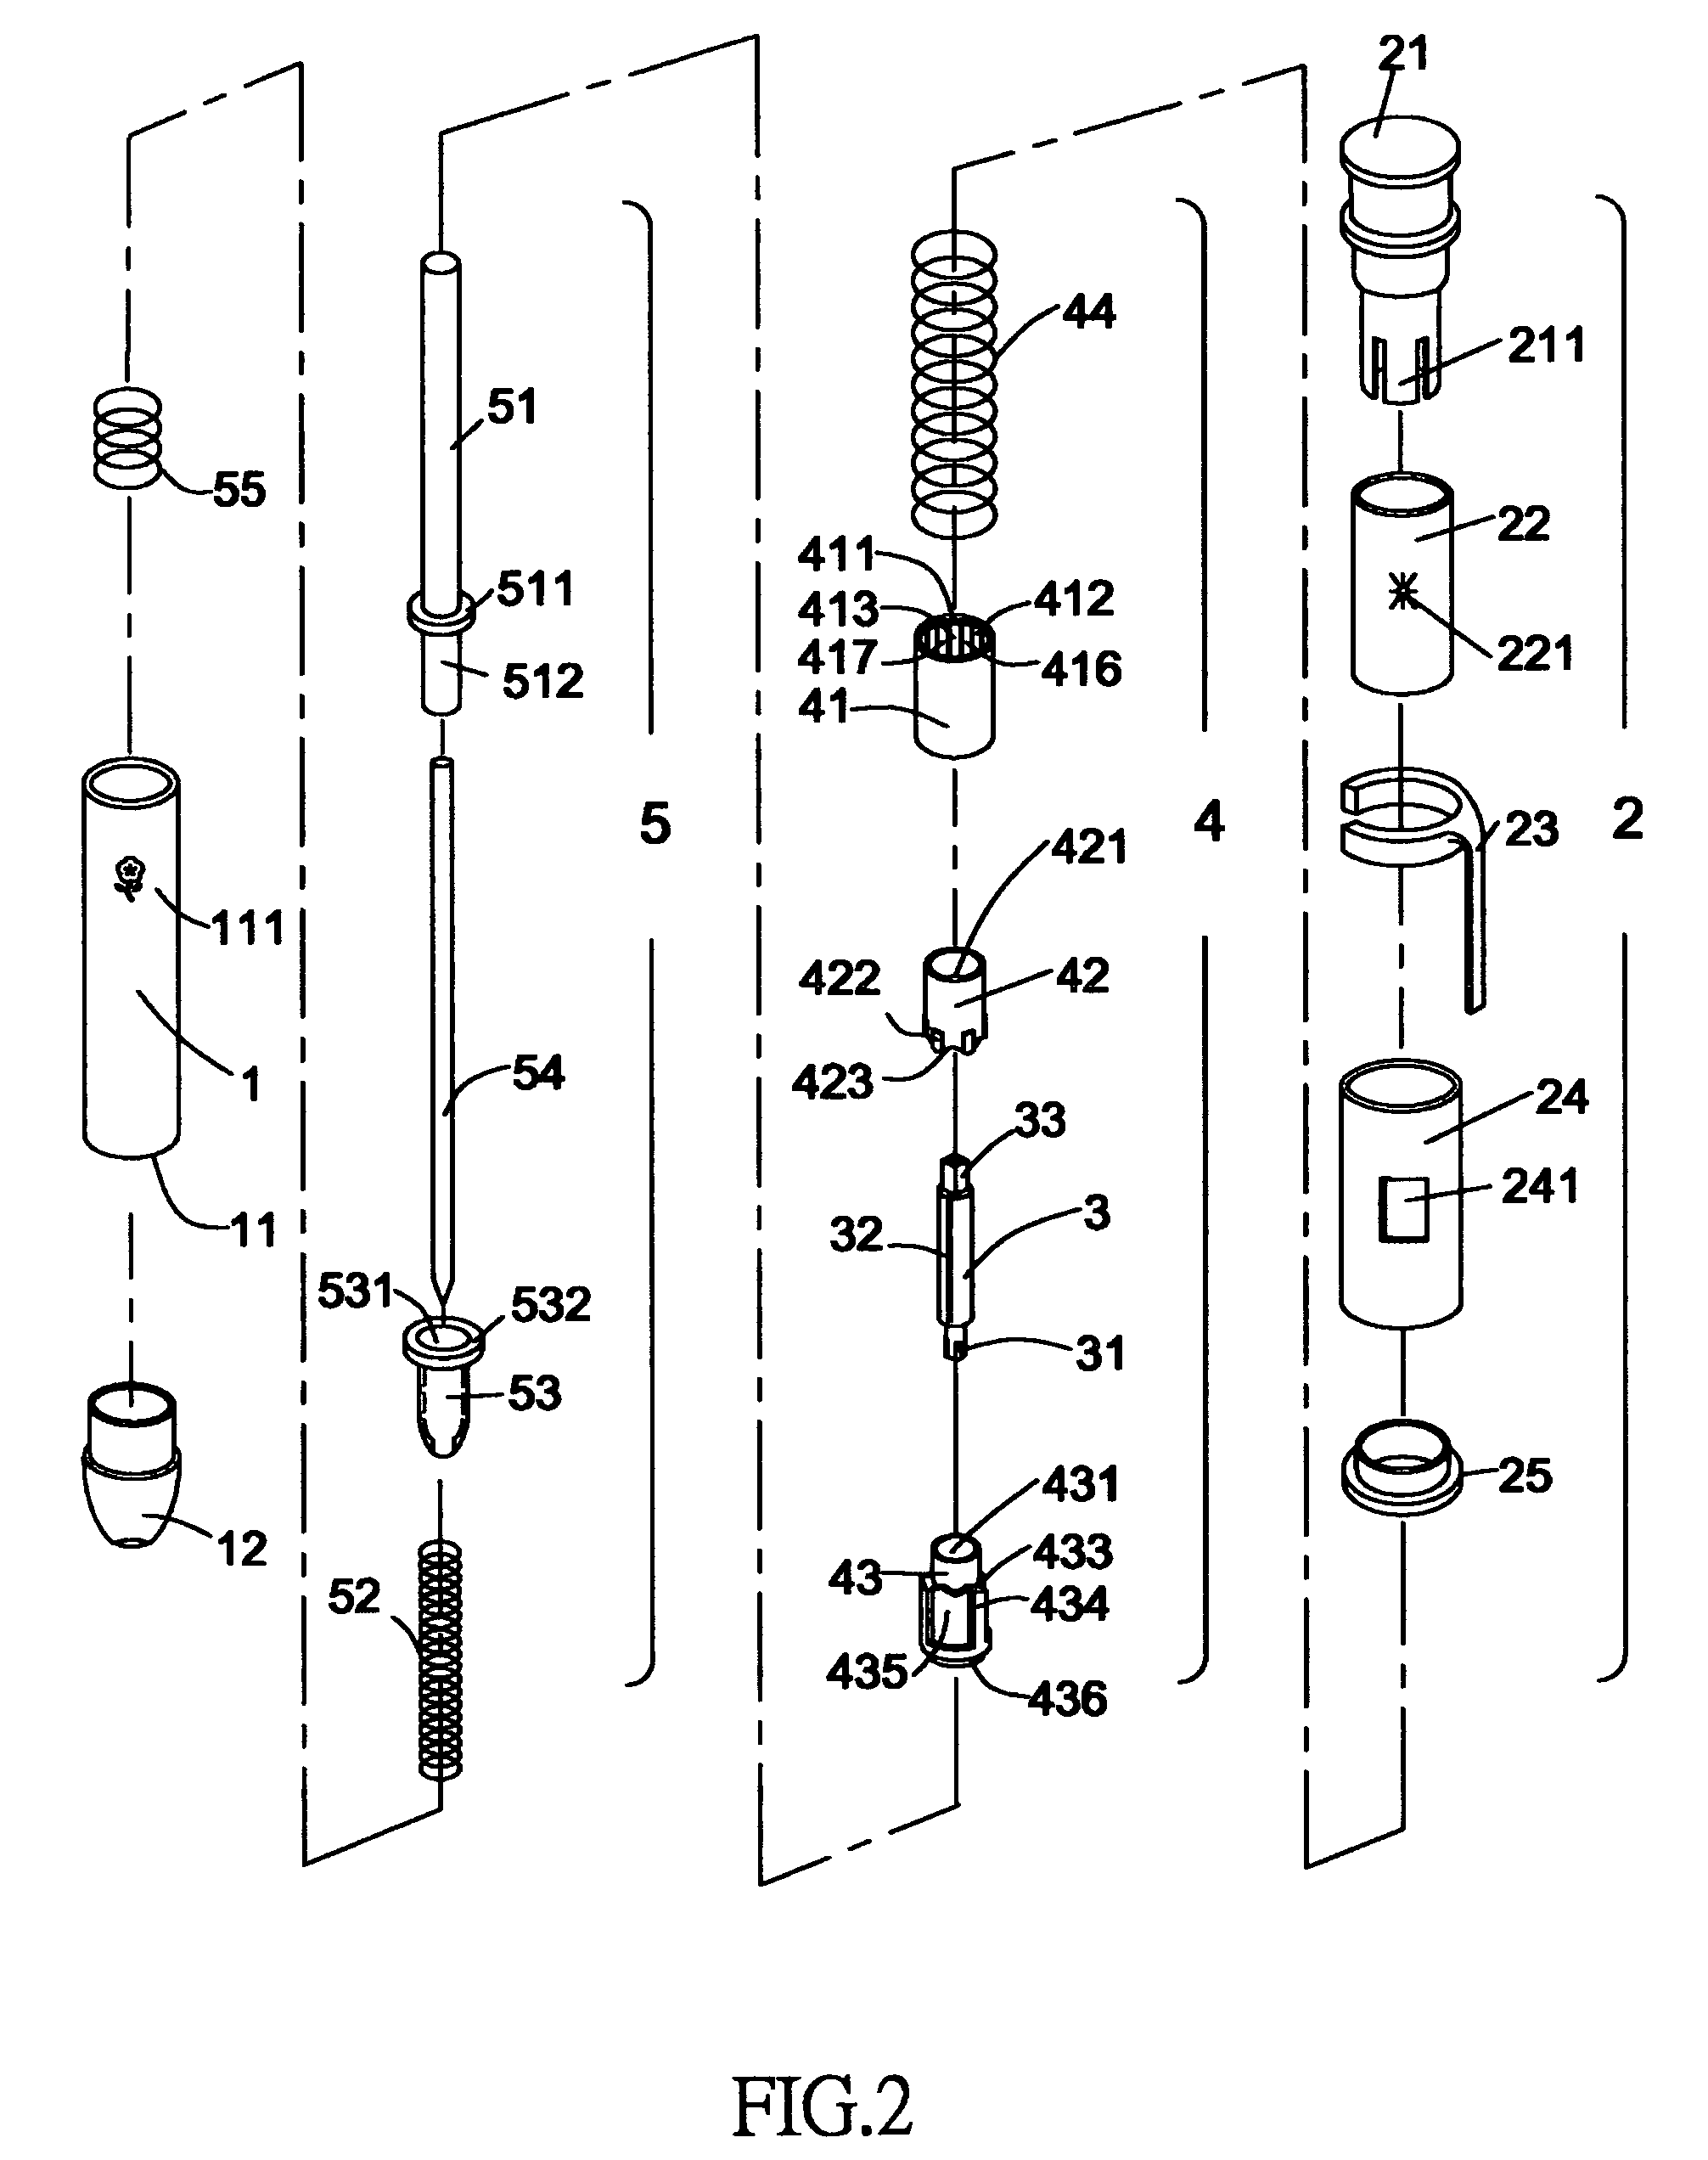 Retractable pen with retraction-linking device for extending pen-body